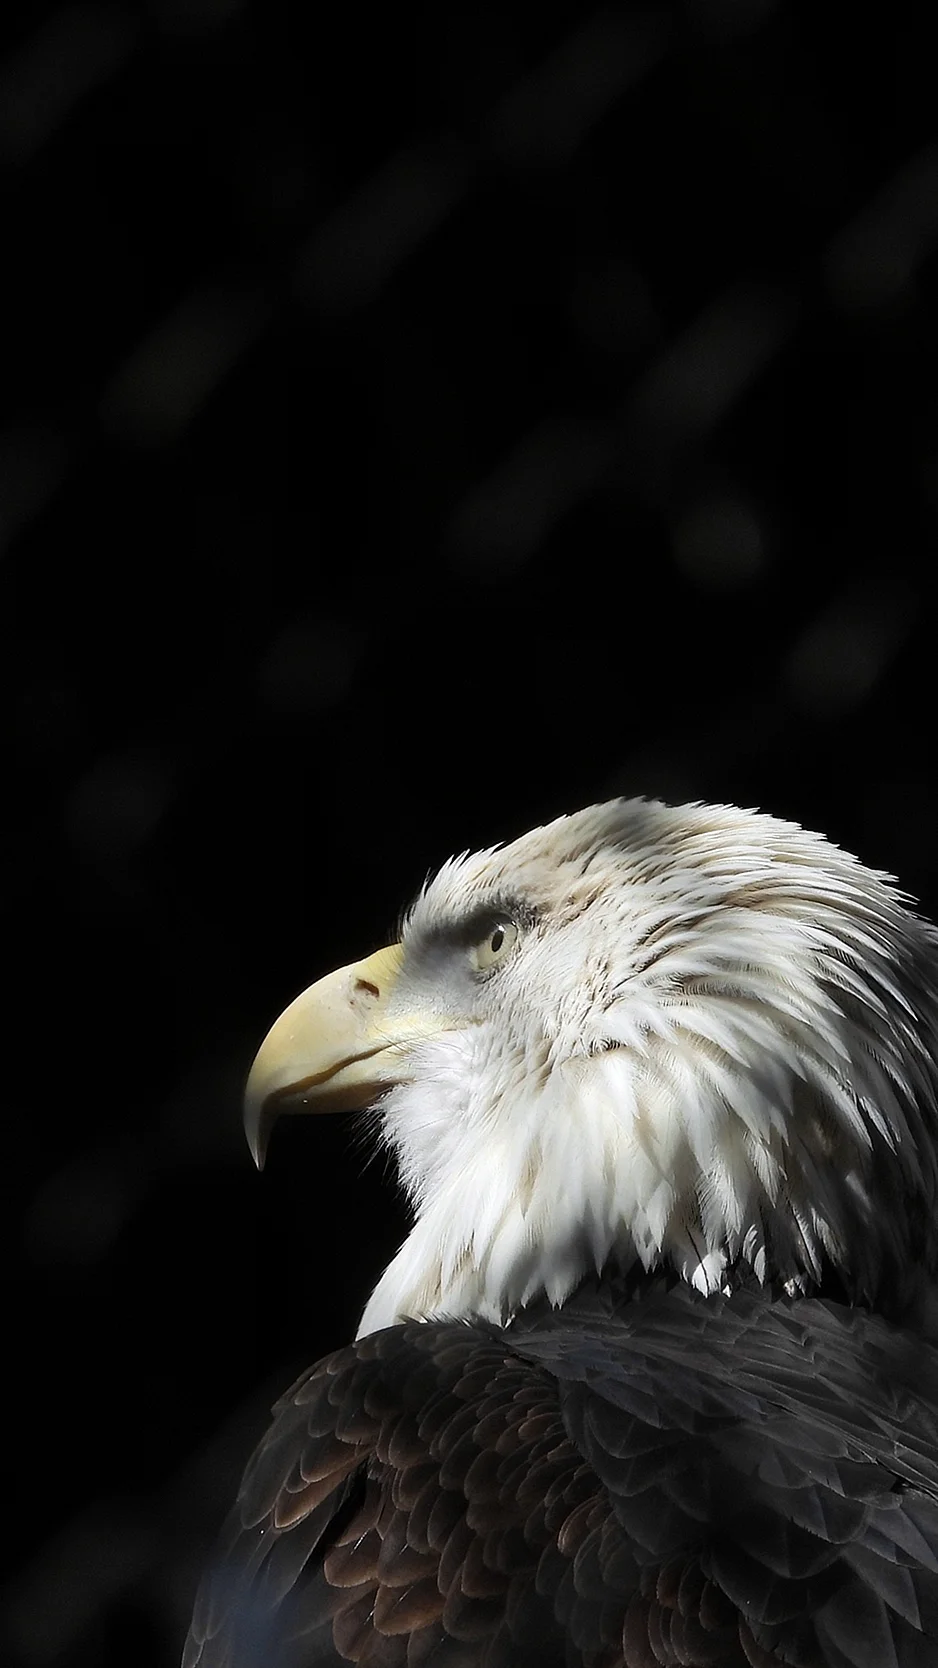 Eagle iPhone Wallpaper For iPhone